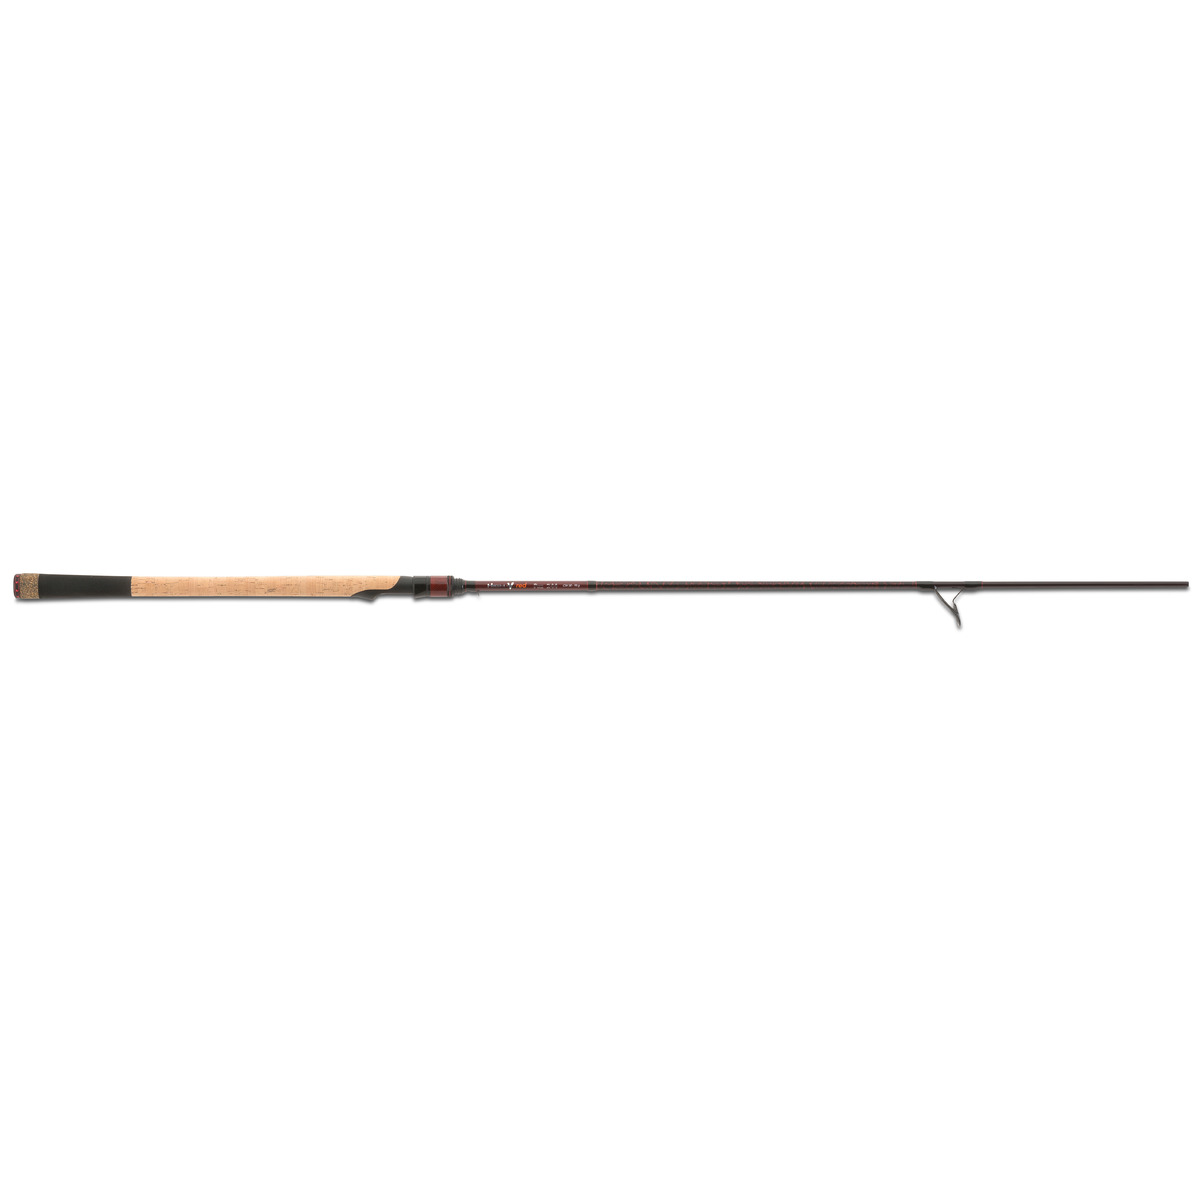 Iron Claw High-v Red Pike - 244 30-95 g